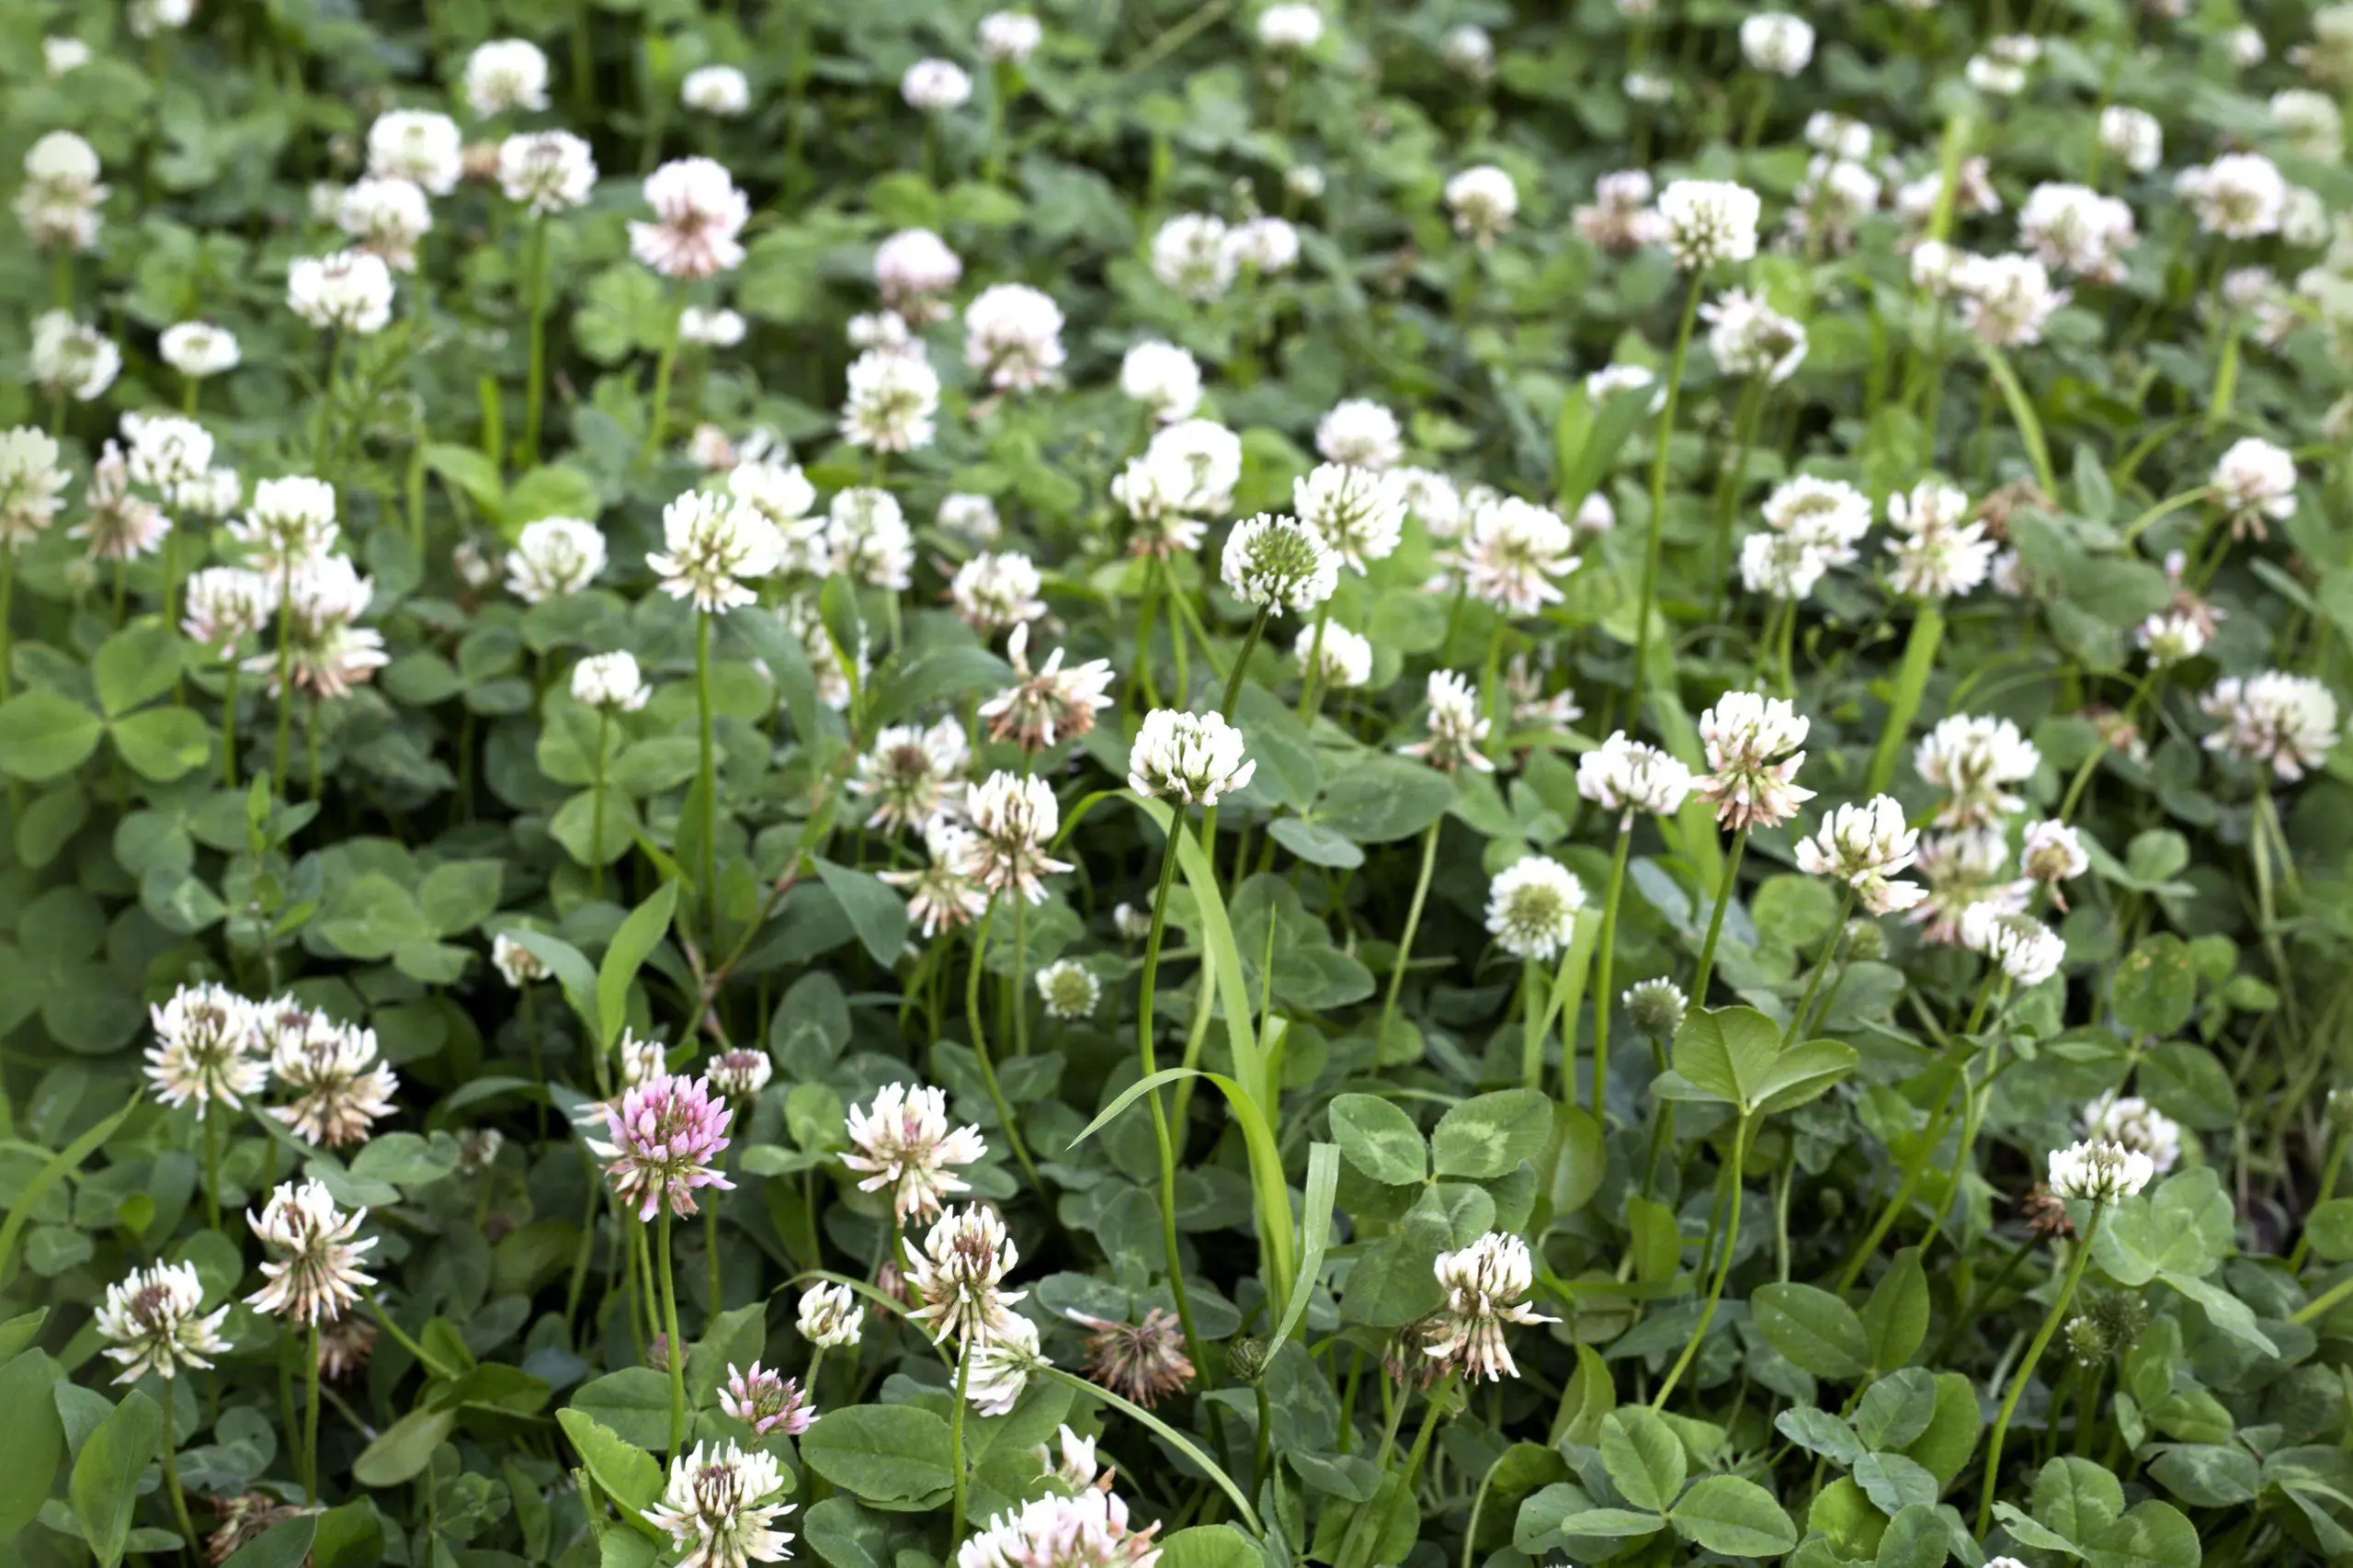 White Clover blankets an area so condensely little else has a chance to grow